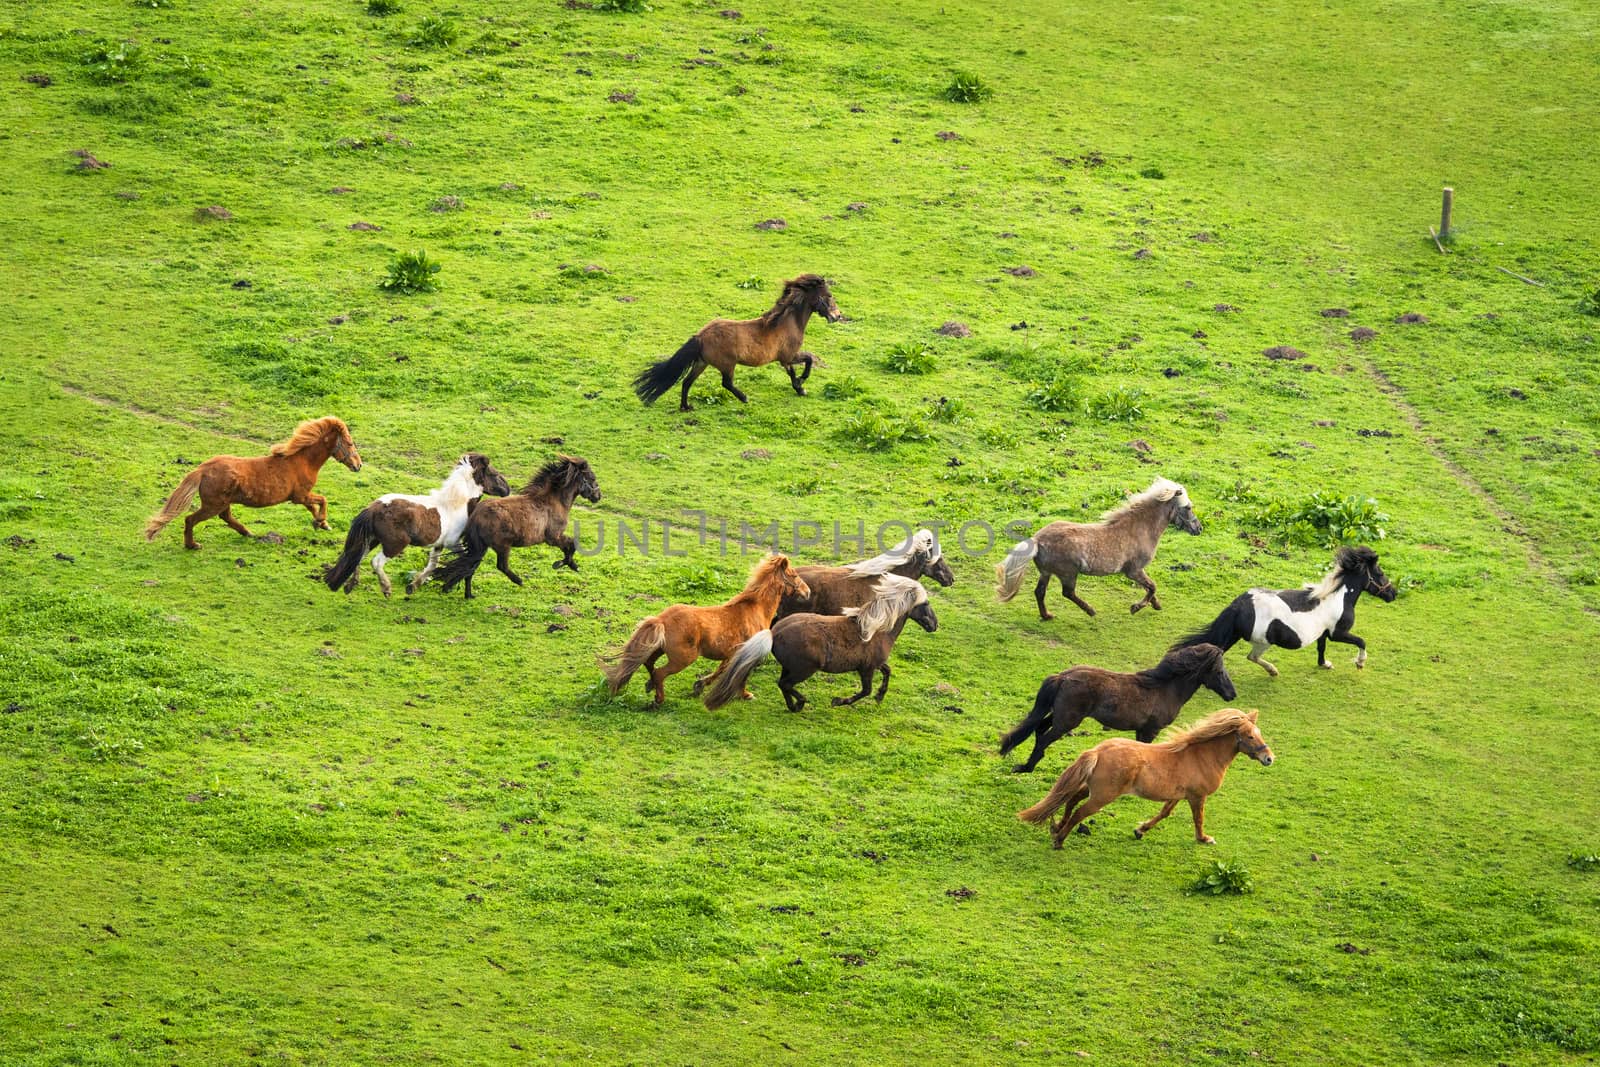 Herd of wild pony horses running on a rural meadow with green grass